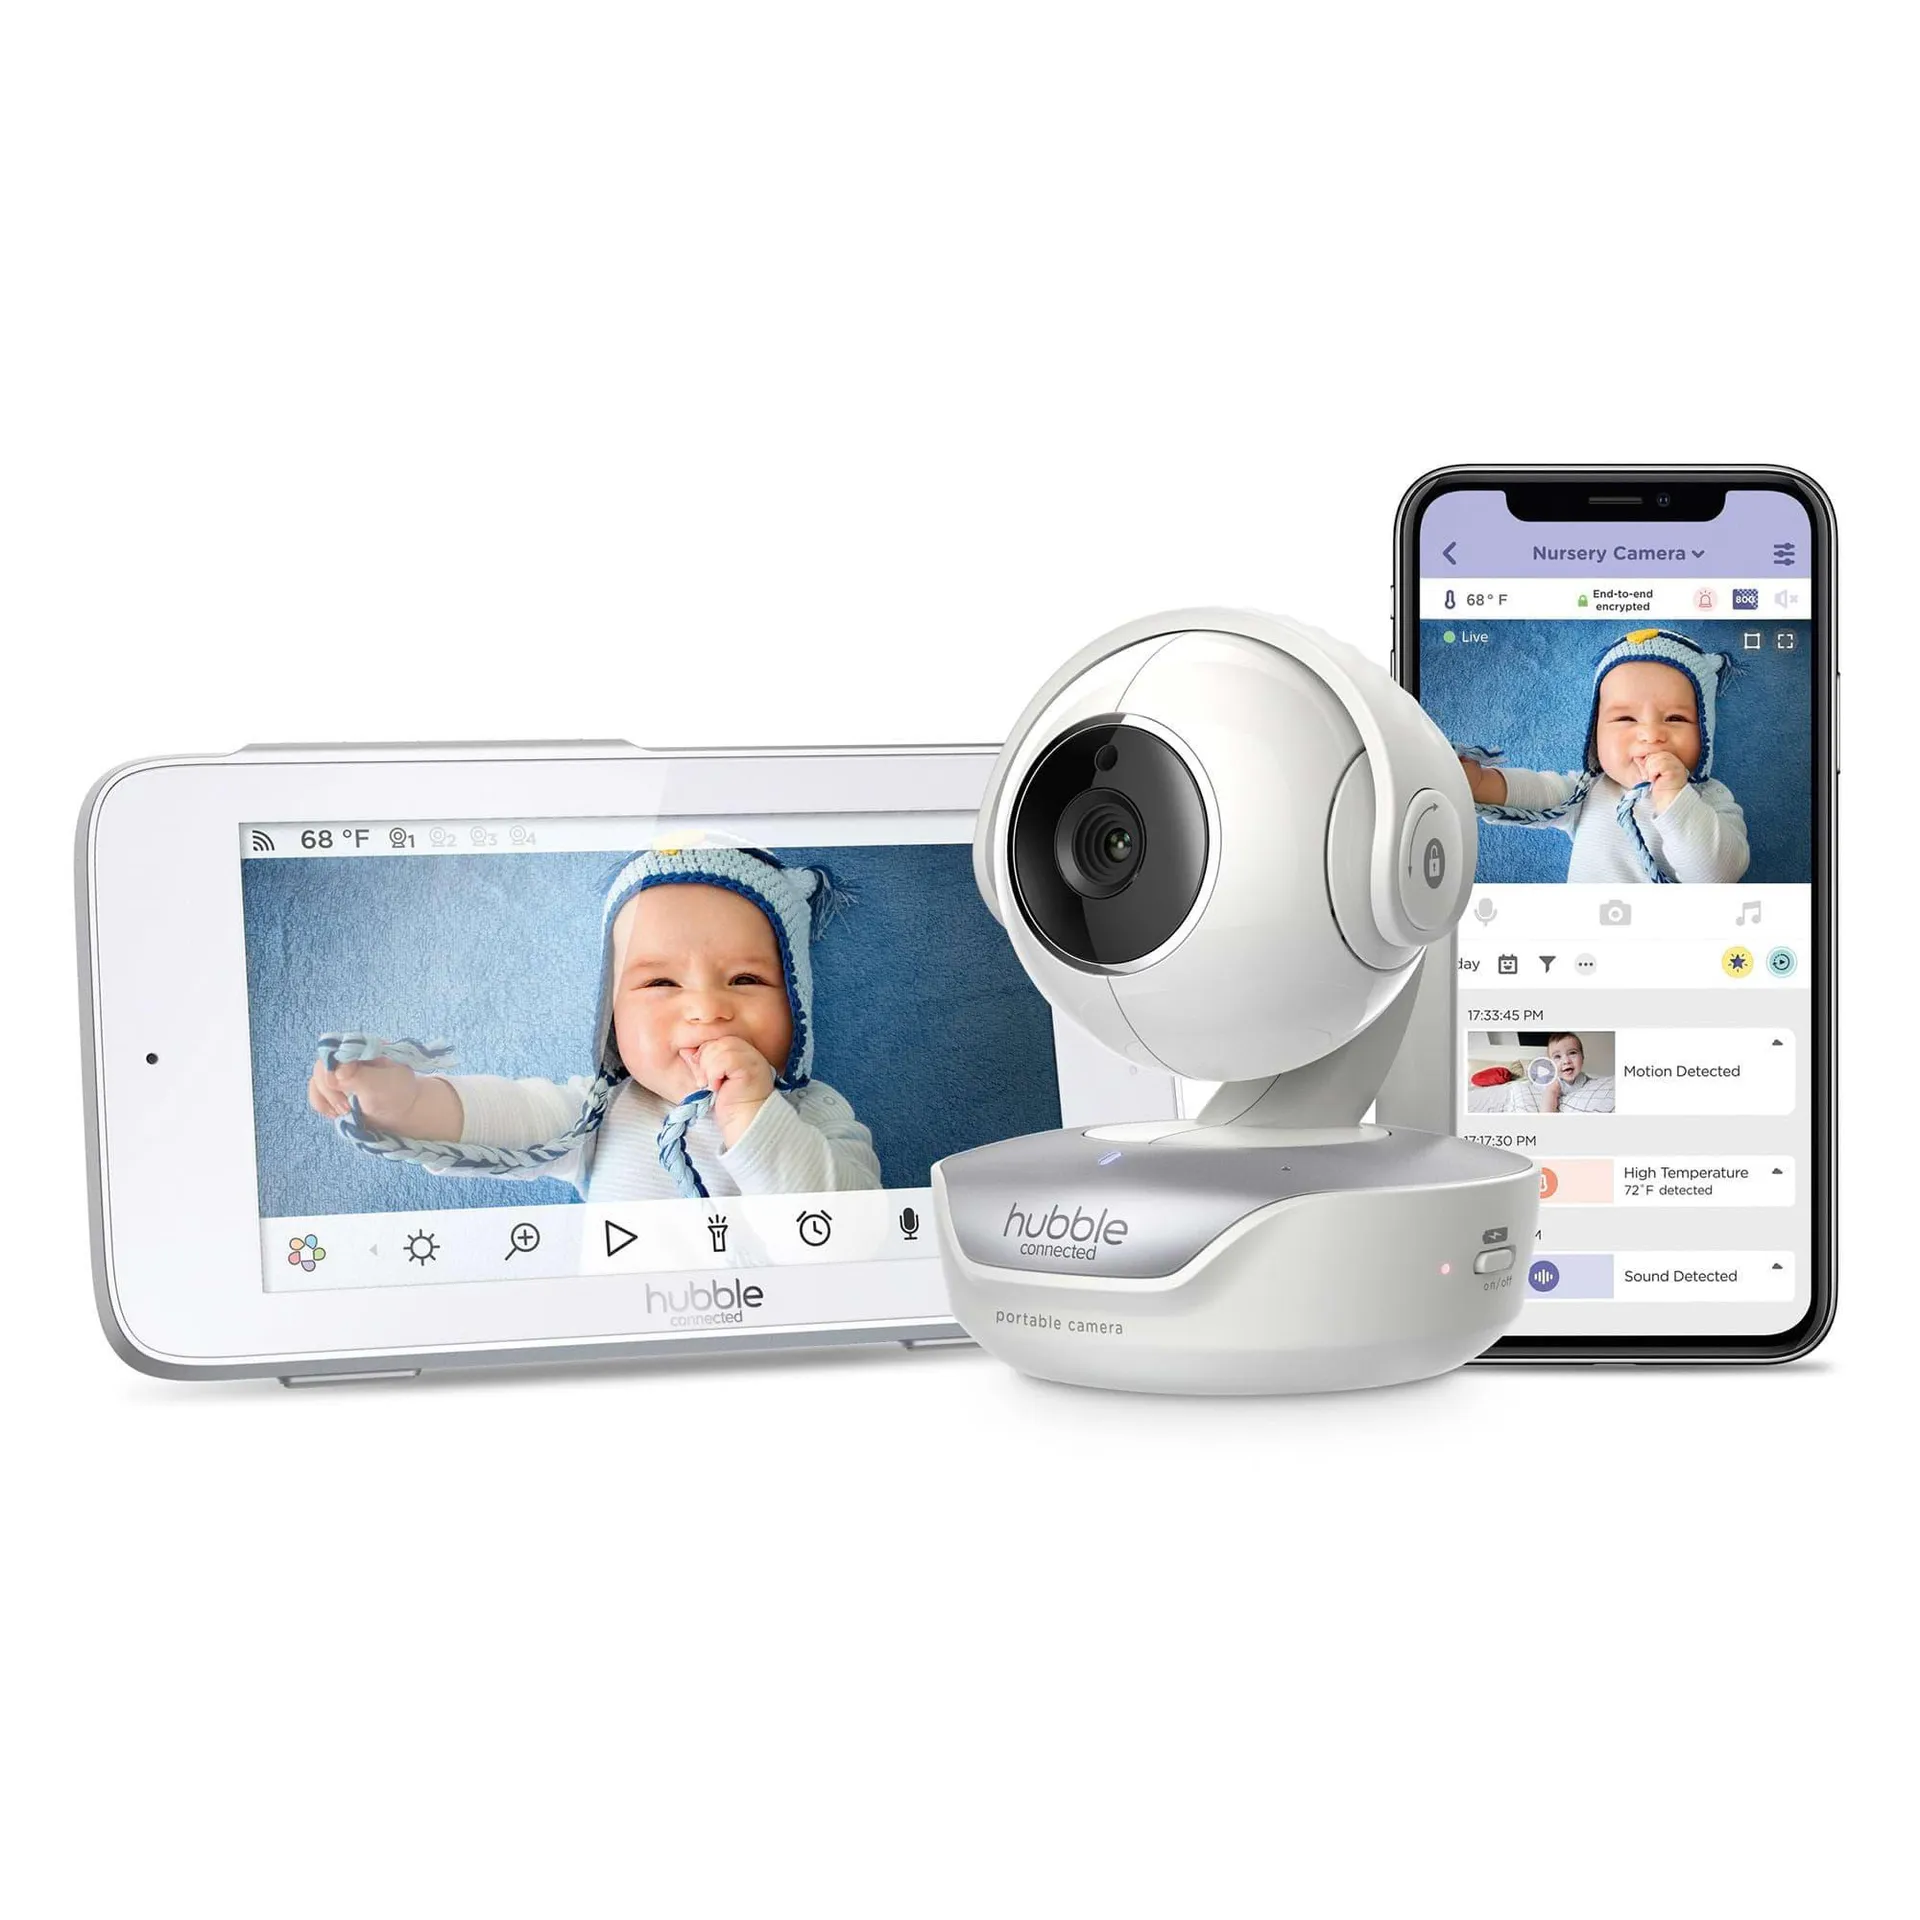 Hubble Nursery Pal Deluxe 5 Baby Monitor in White